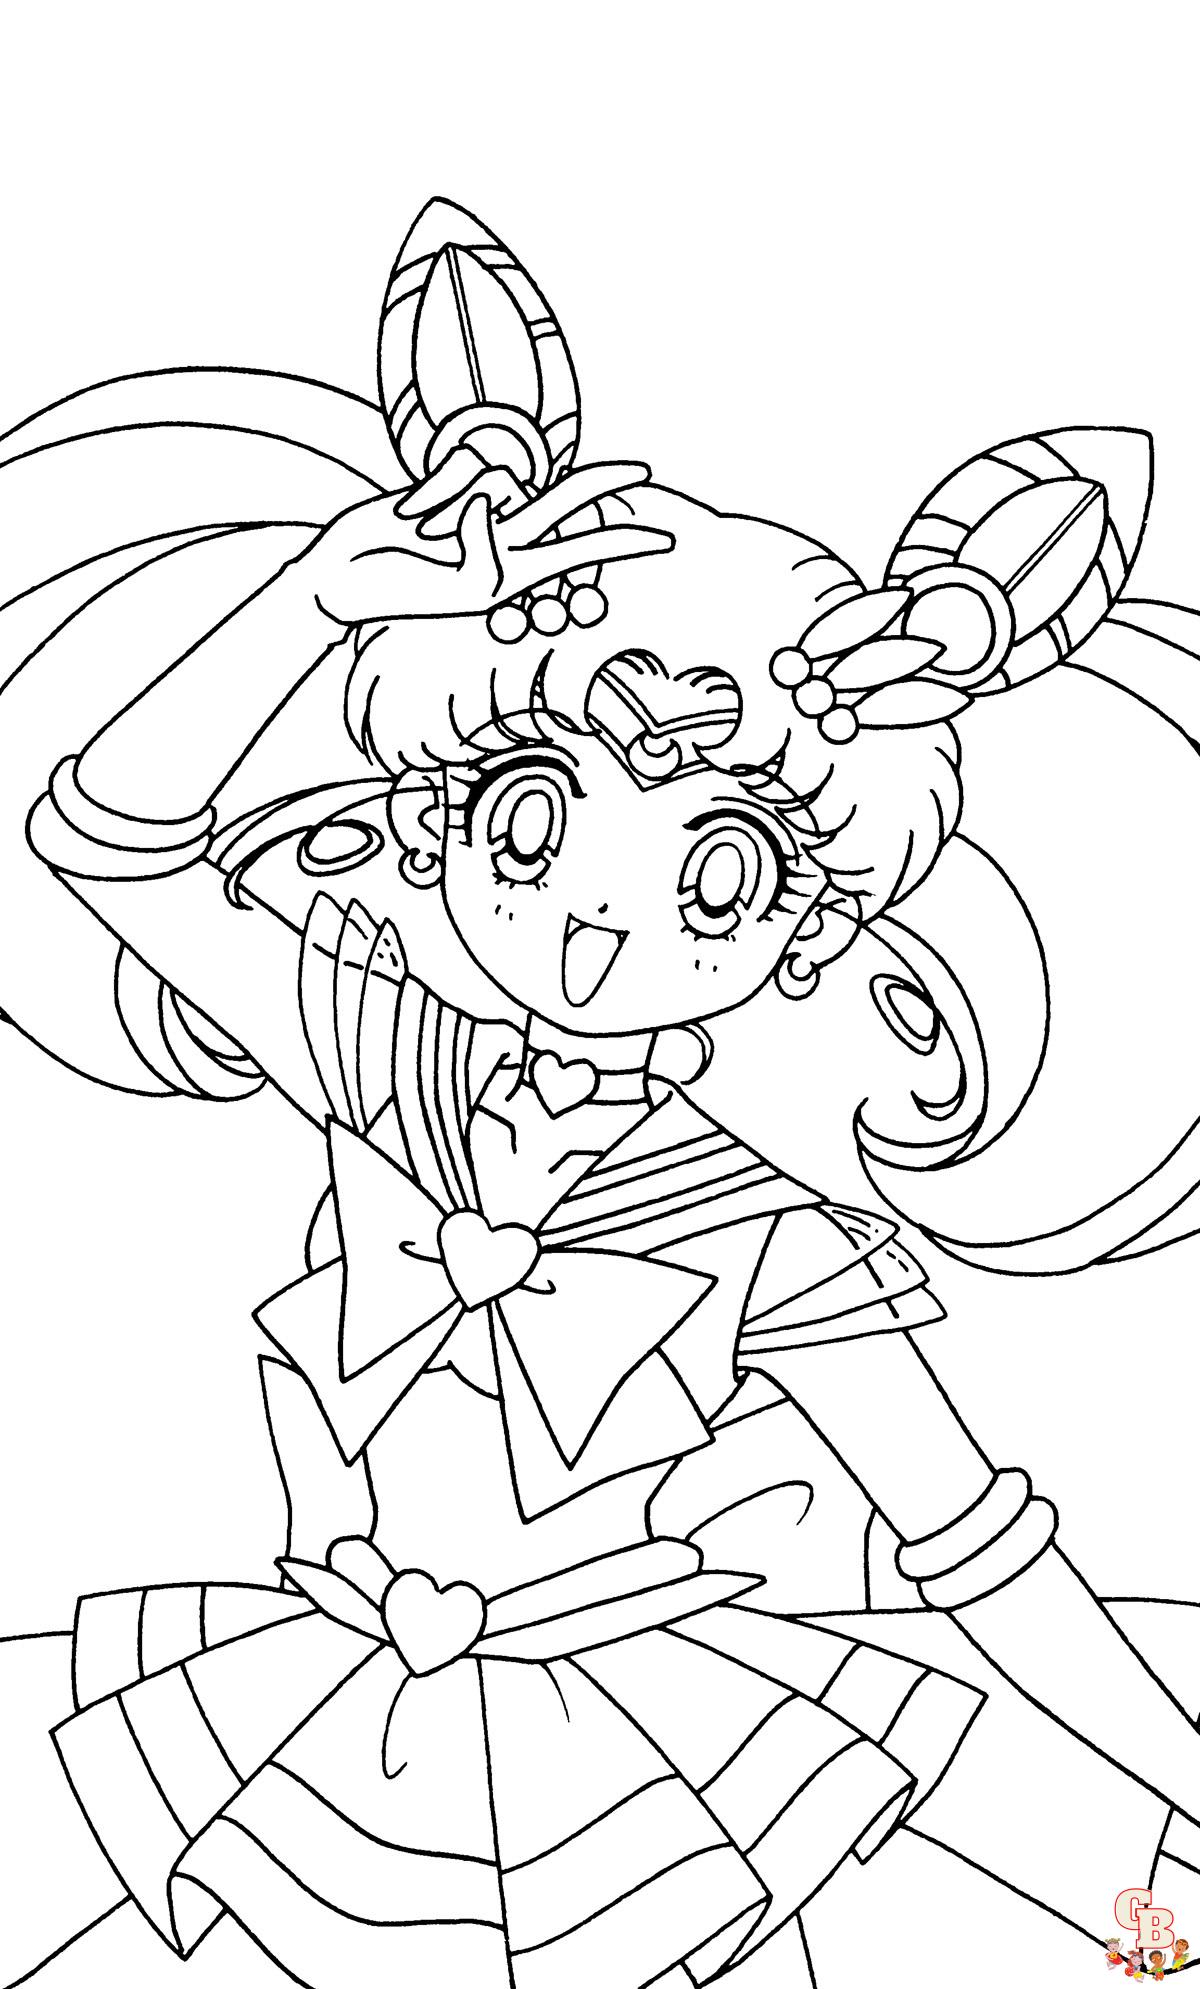 Cute Chibiusa Sailor Moon Coloring Pages: Printable Fun for Kids